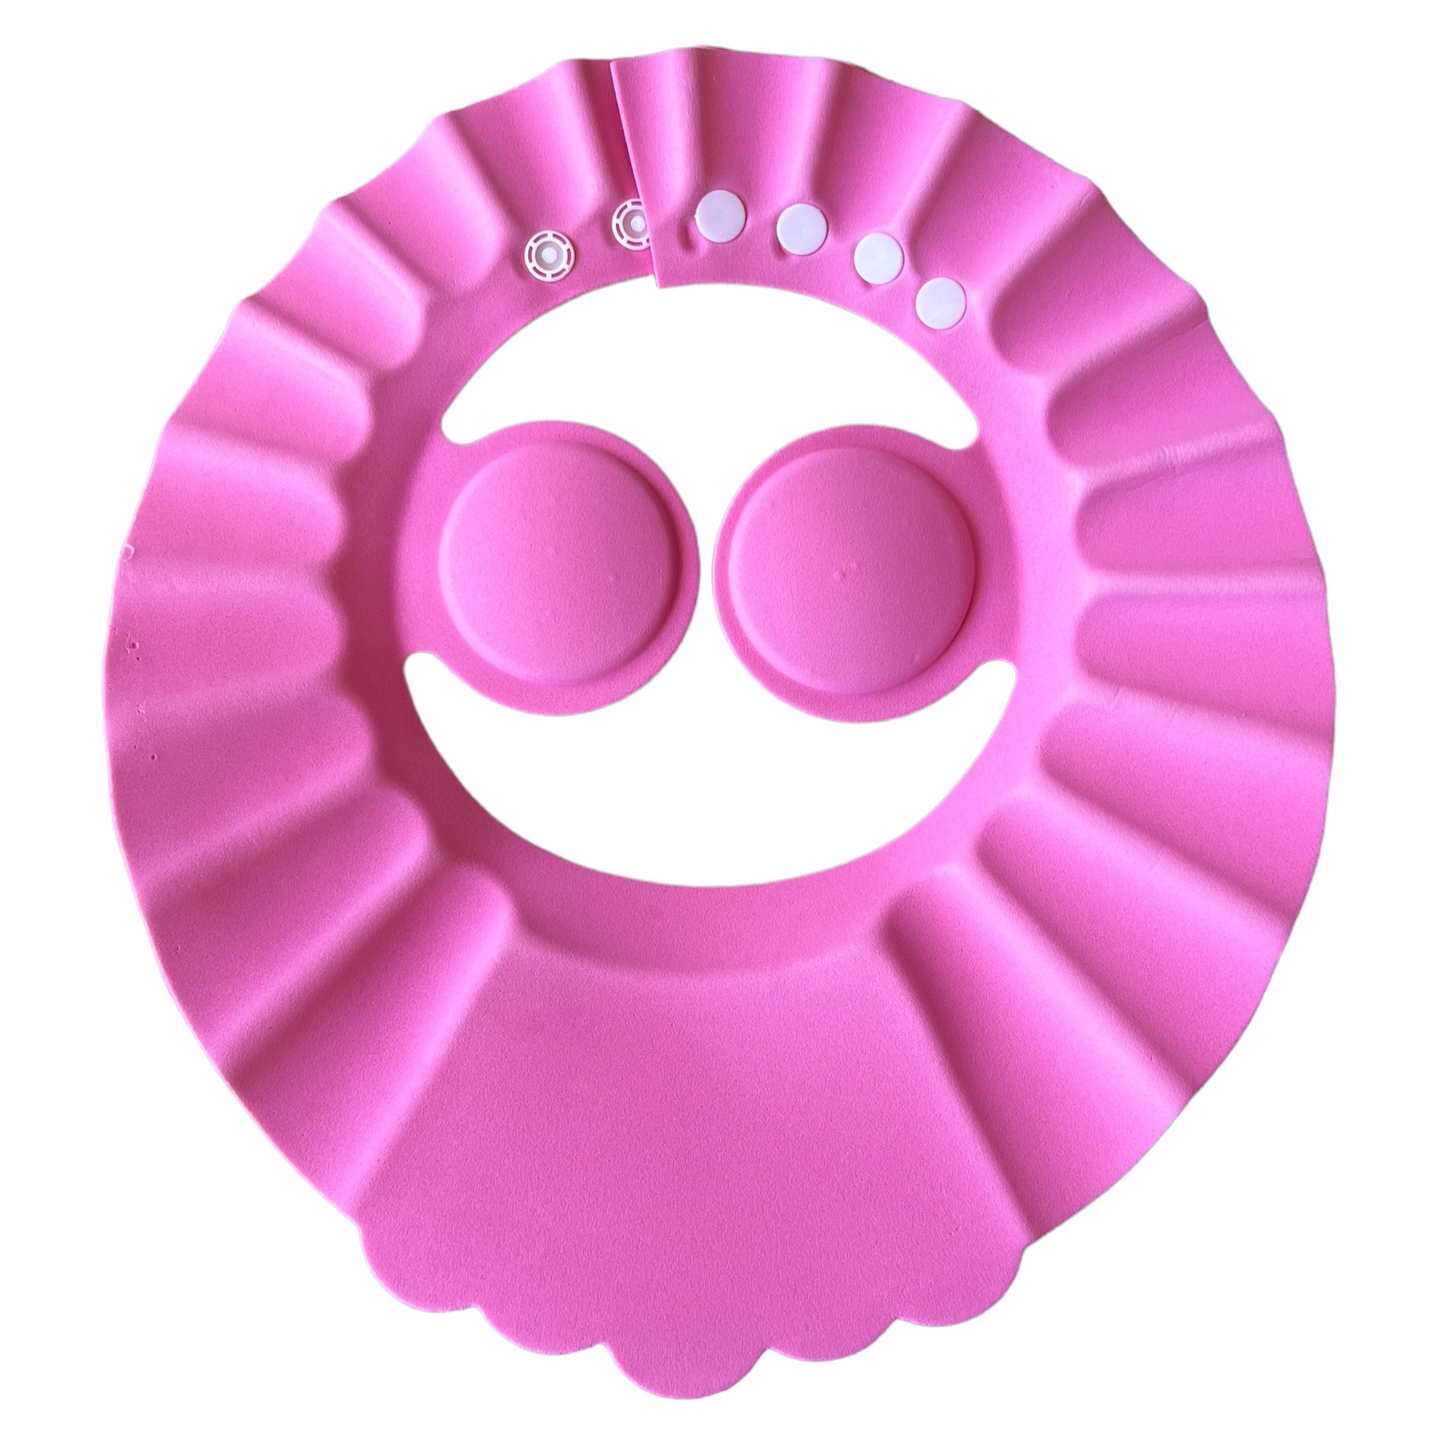 Face Protector for showers, bath and hair washing  SPIRIT SPARKPLUGS Pink  